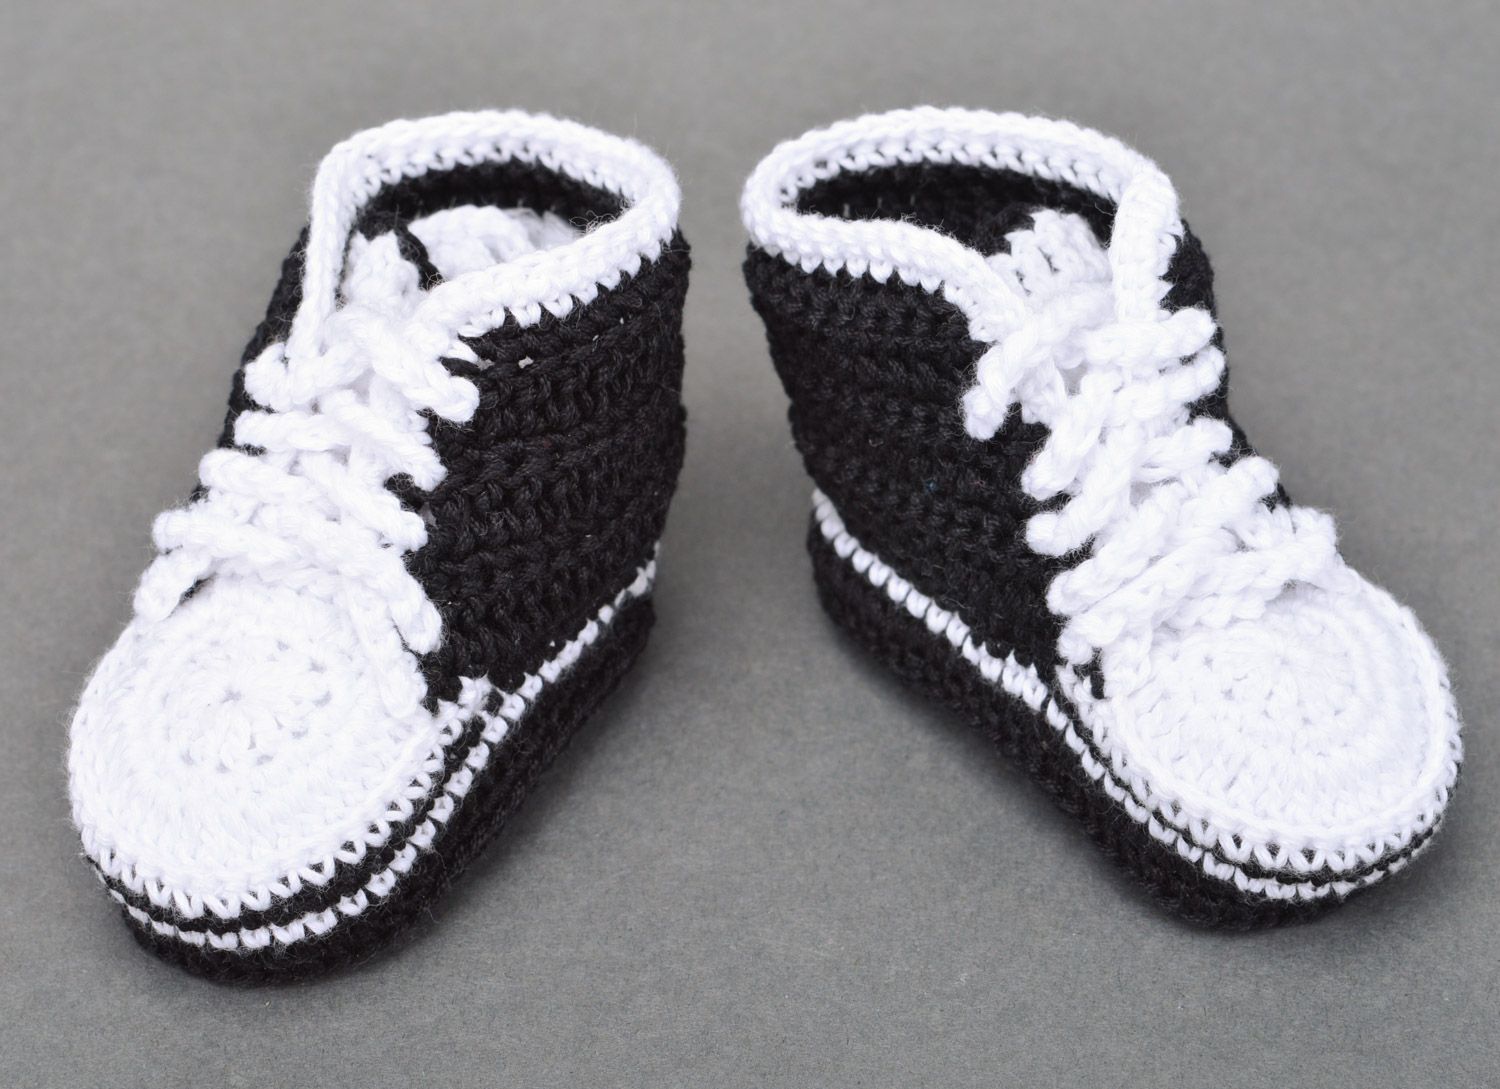 Handmade crochet baby booties in black and white colors with shoelaces photo 2